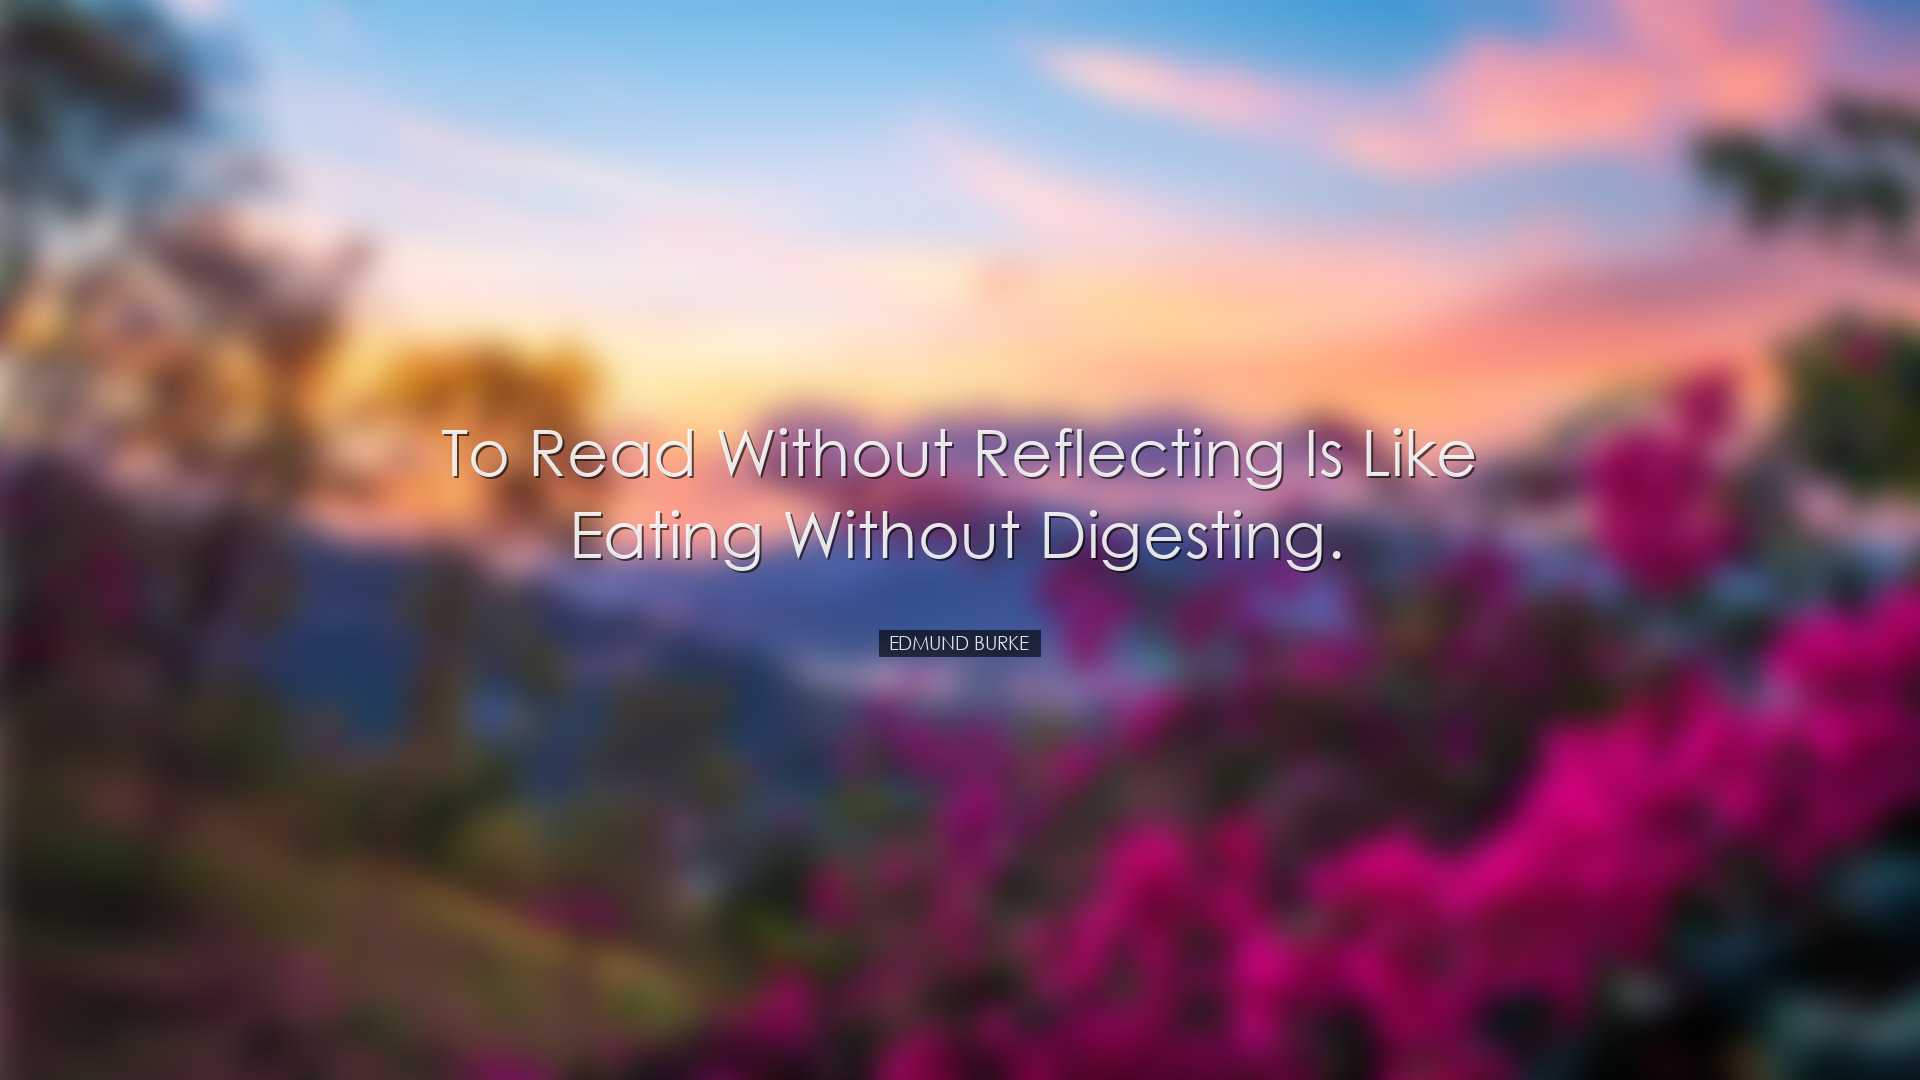 To read without reflecting is like eating without digesting. - Edm